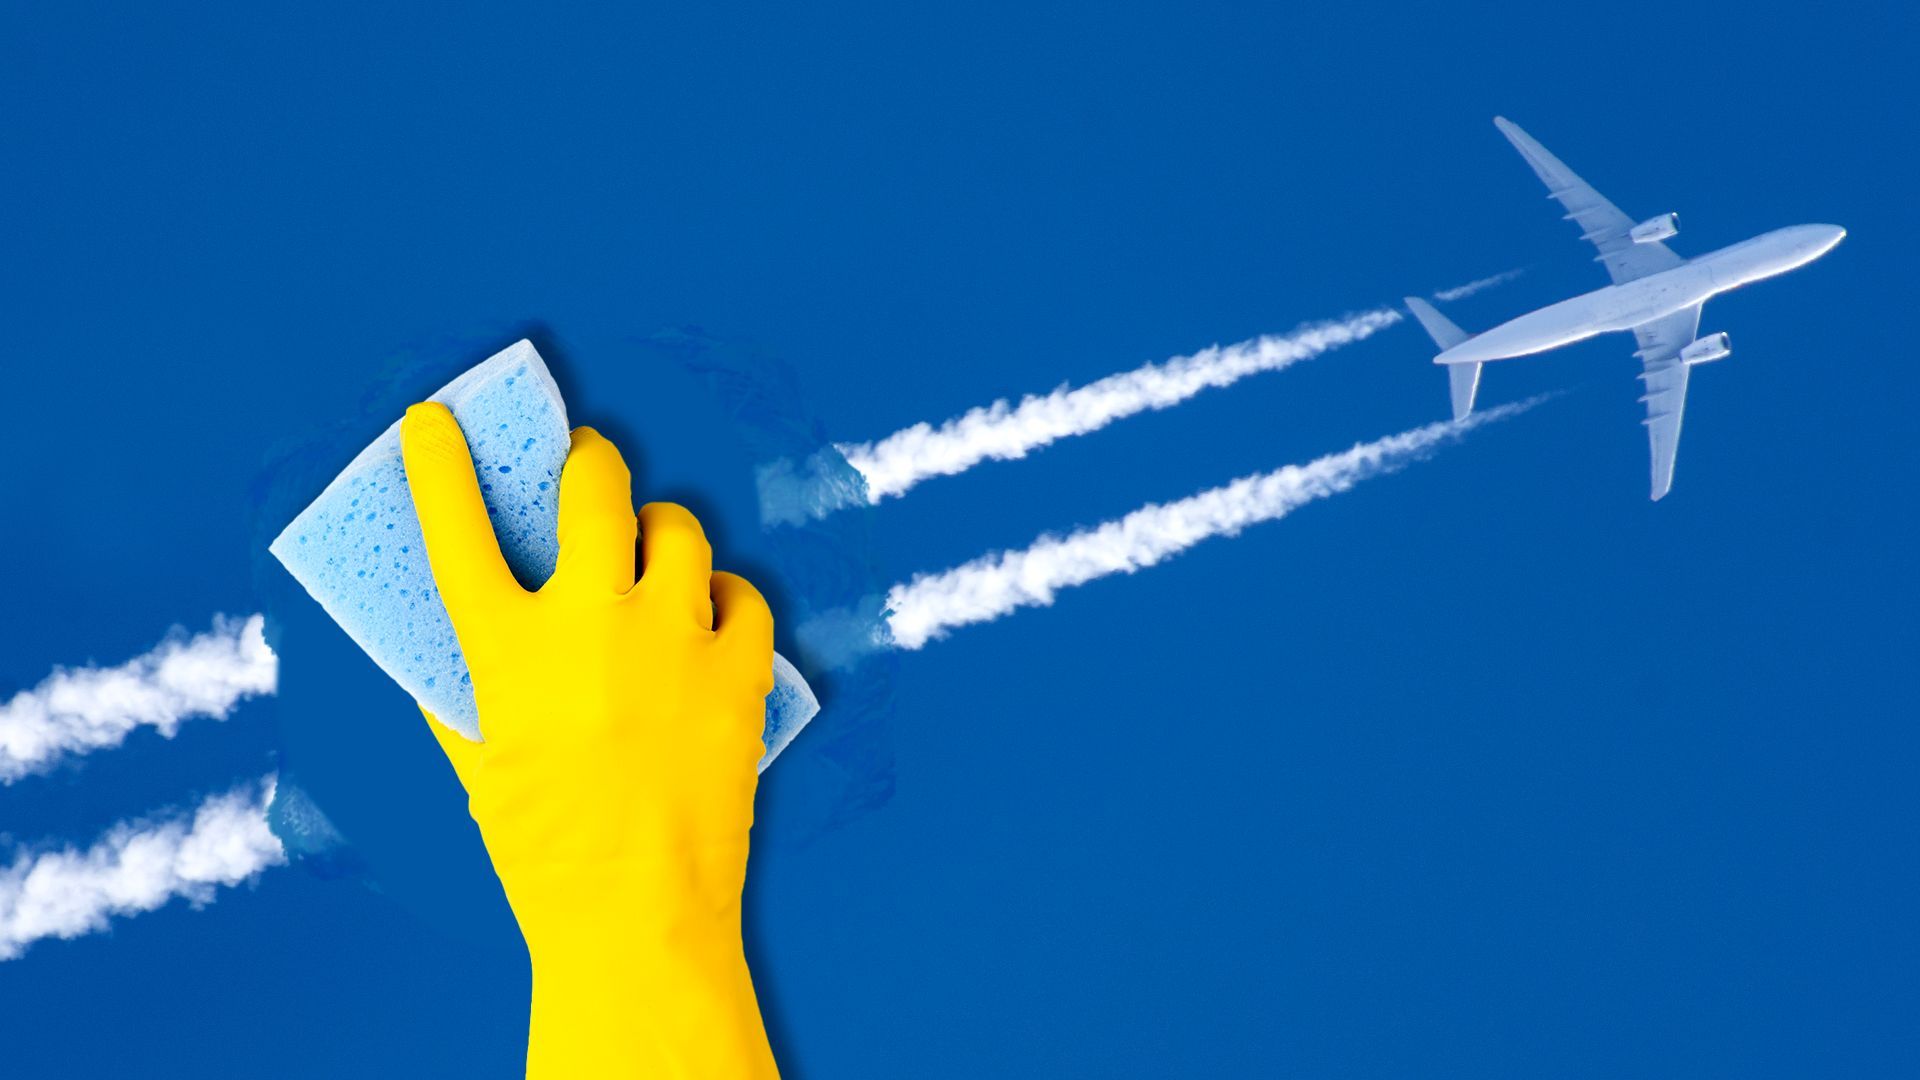 Illustration of a gloved hand scrubbing an airplane contrail with a sponge